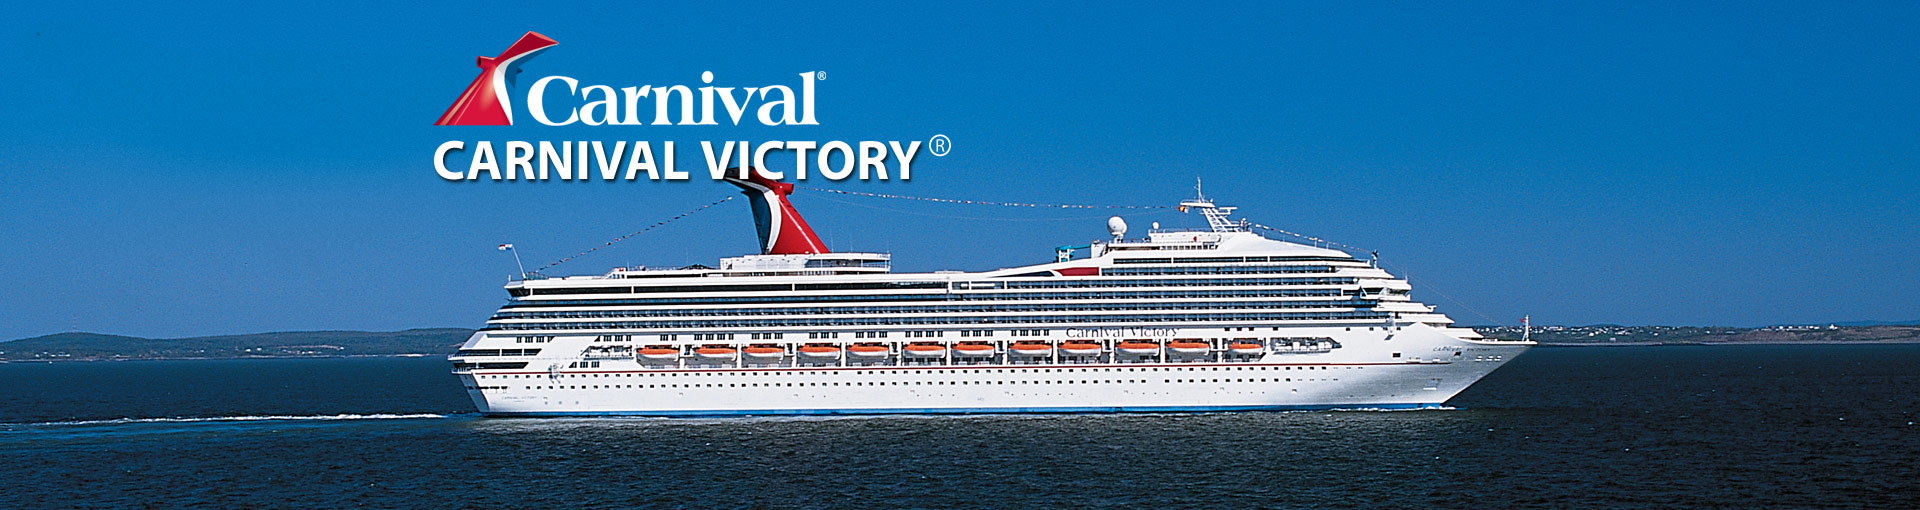 Pictures Of The Carnival Victory 5